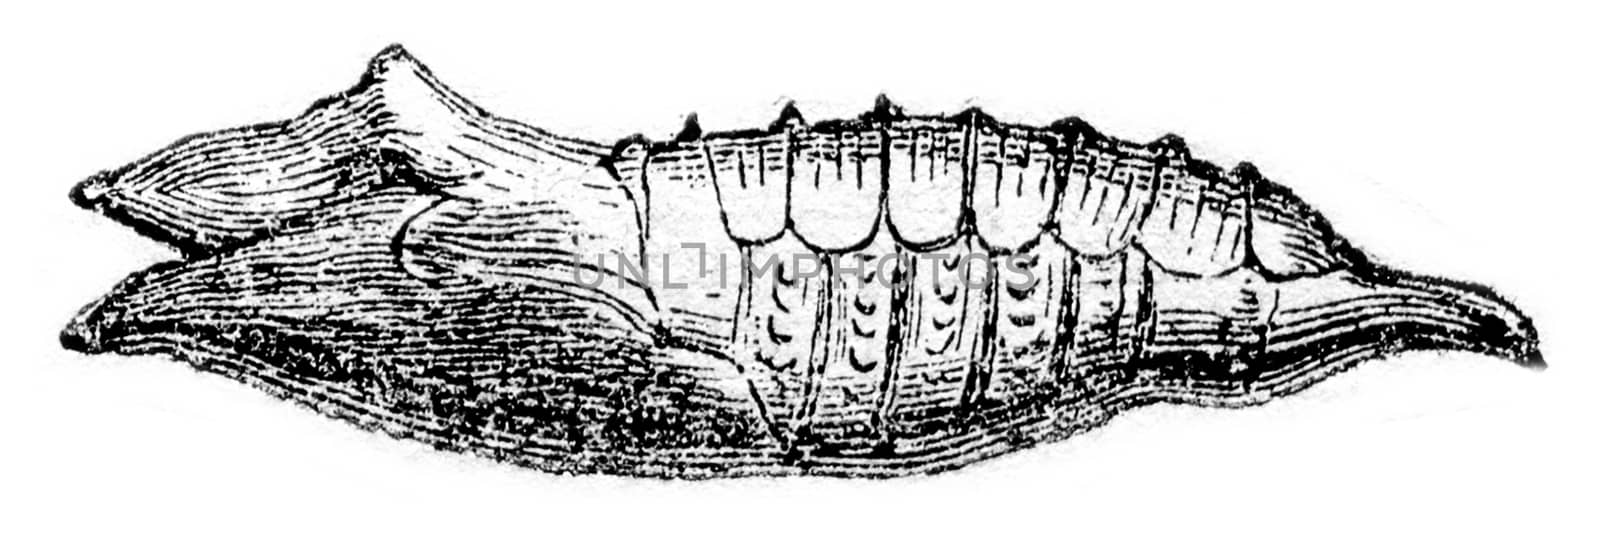 Chrysalis of Vanesse lo, vintage engraved illustration. Magasin Pittoresque 1870.
